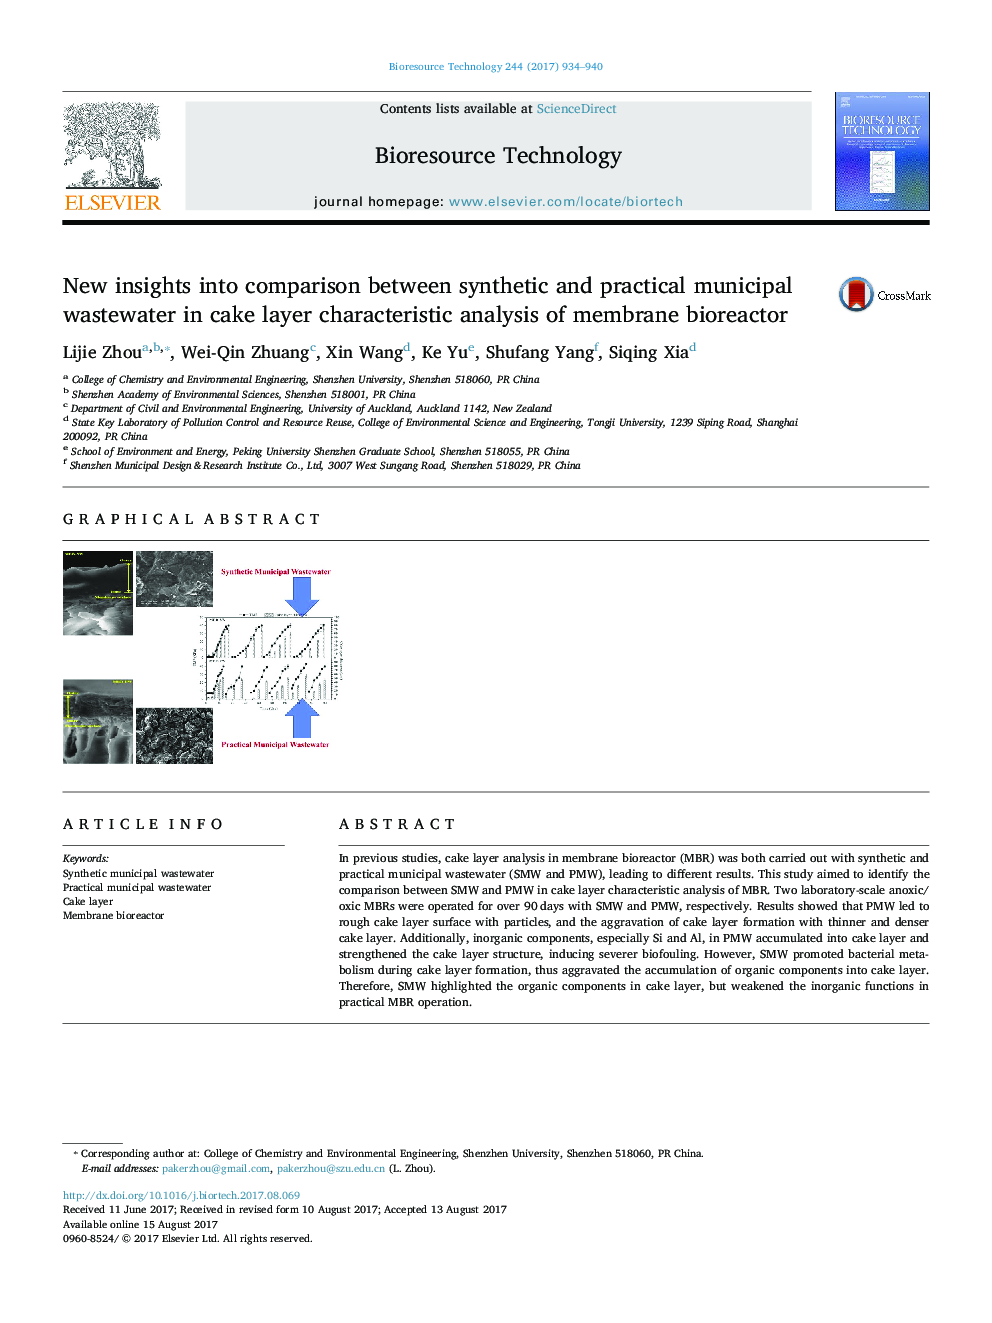 New insights into comparison between synthetic and practical municipal wastewater in cake layer characteristic analysis of membrane bioreactor